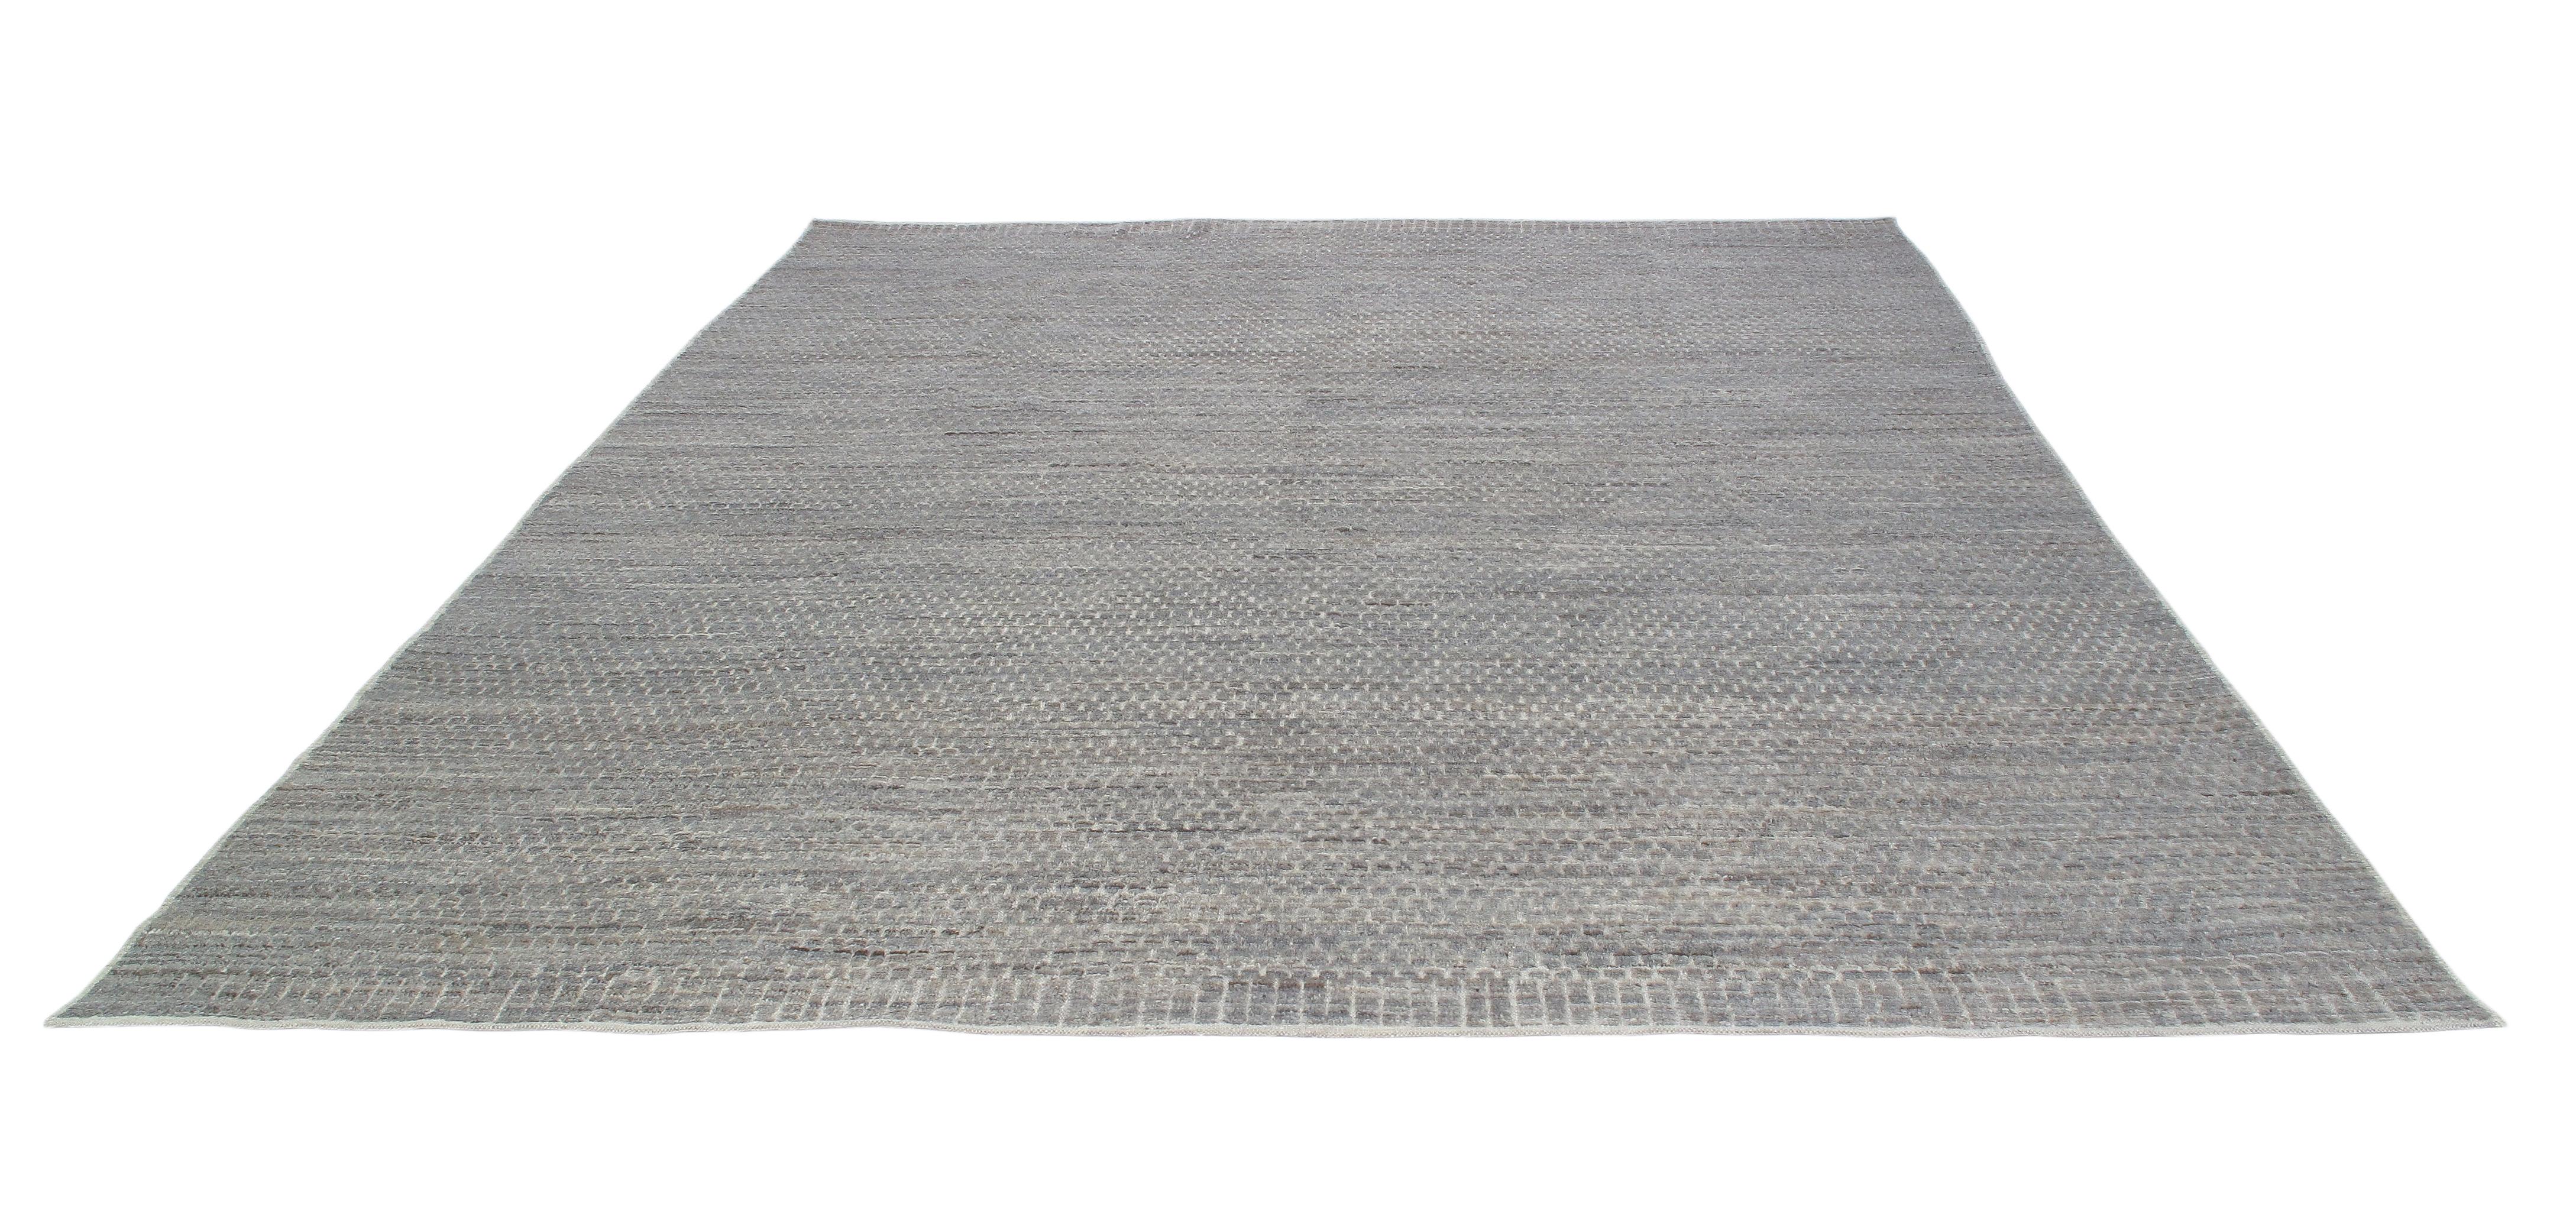 This is a gorgeous relief textural rug.  It is comprised of 100% handspun and handcarded wool.  It has a modern, minimalistic style.  It measures 9'3